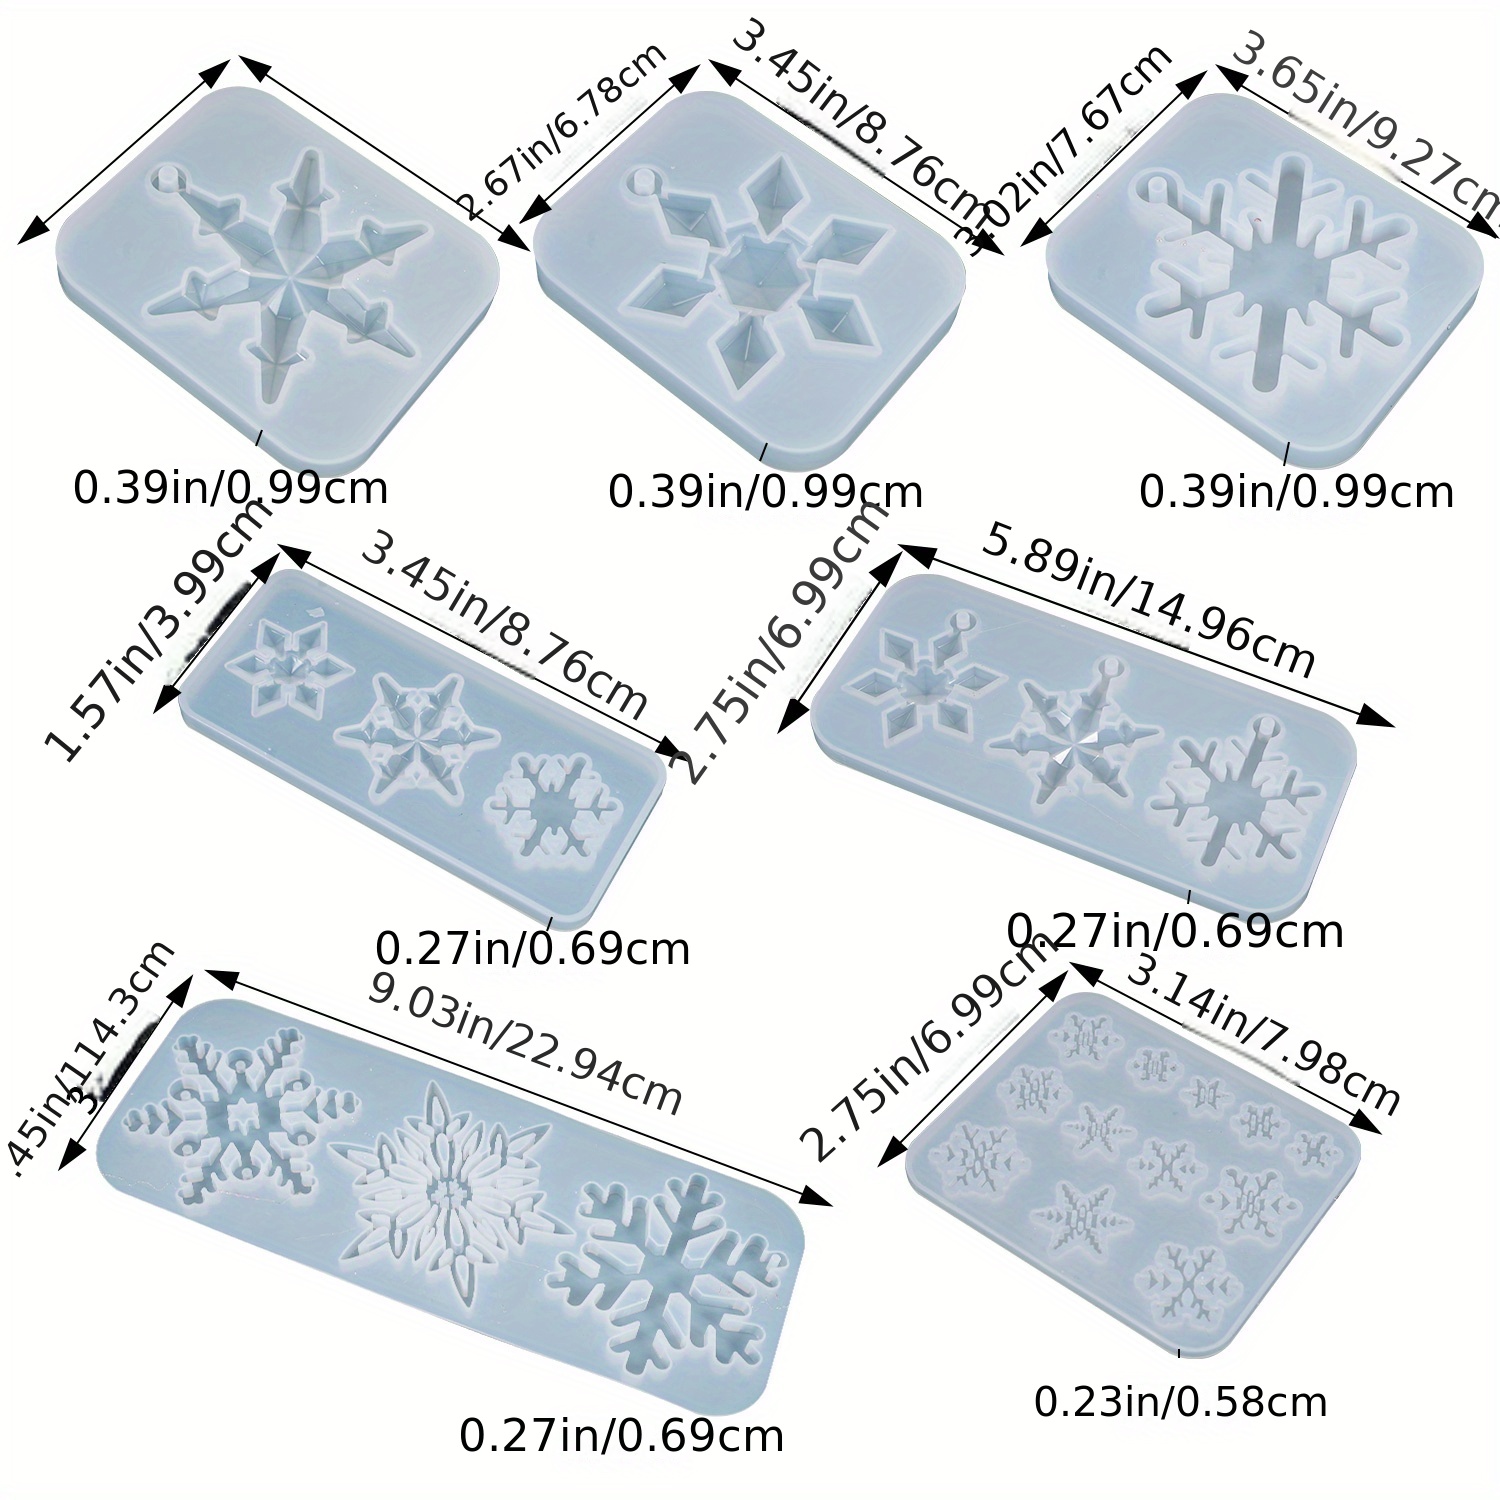 JS Molds Snowflake Silicone mold - The Compleat Sculptor